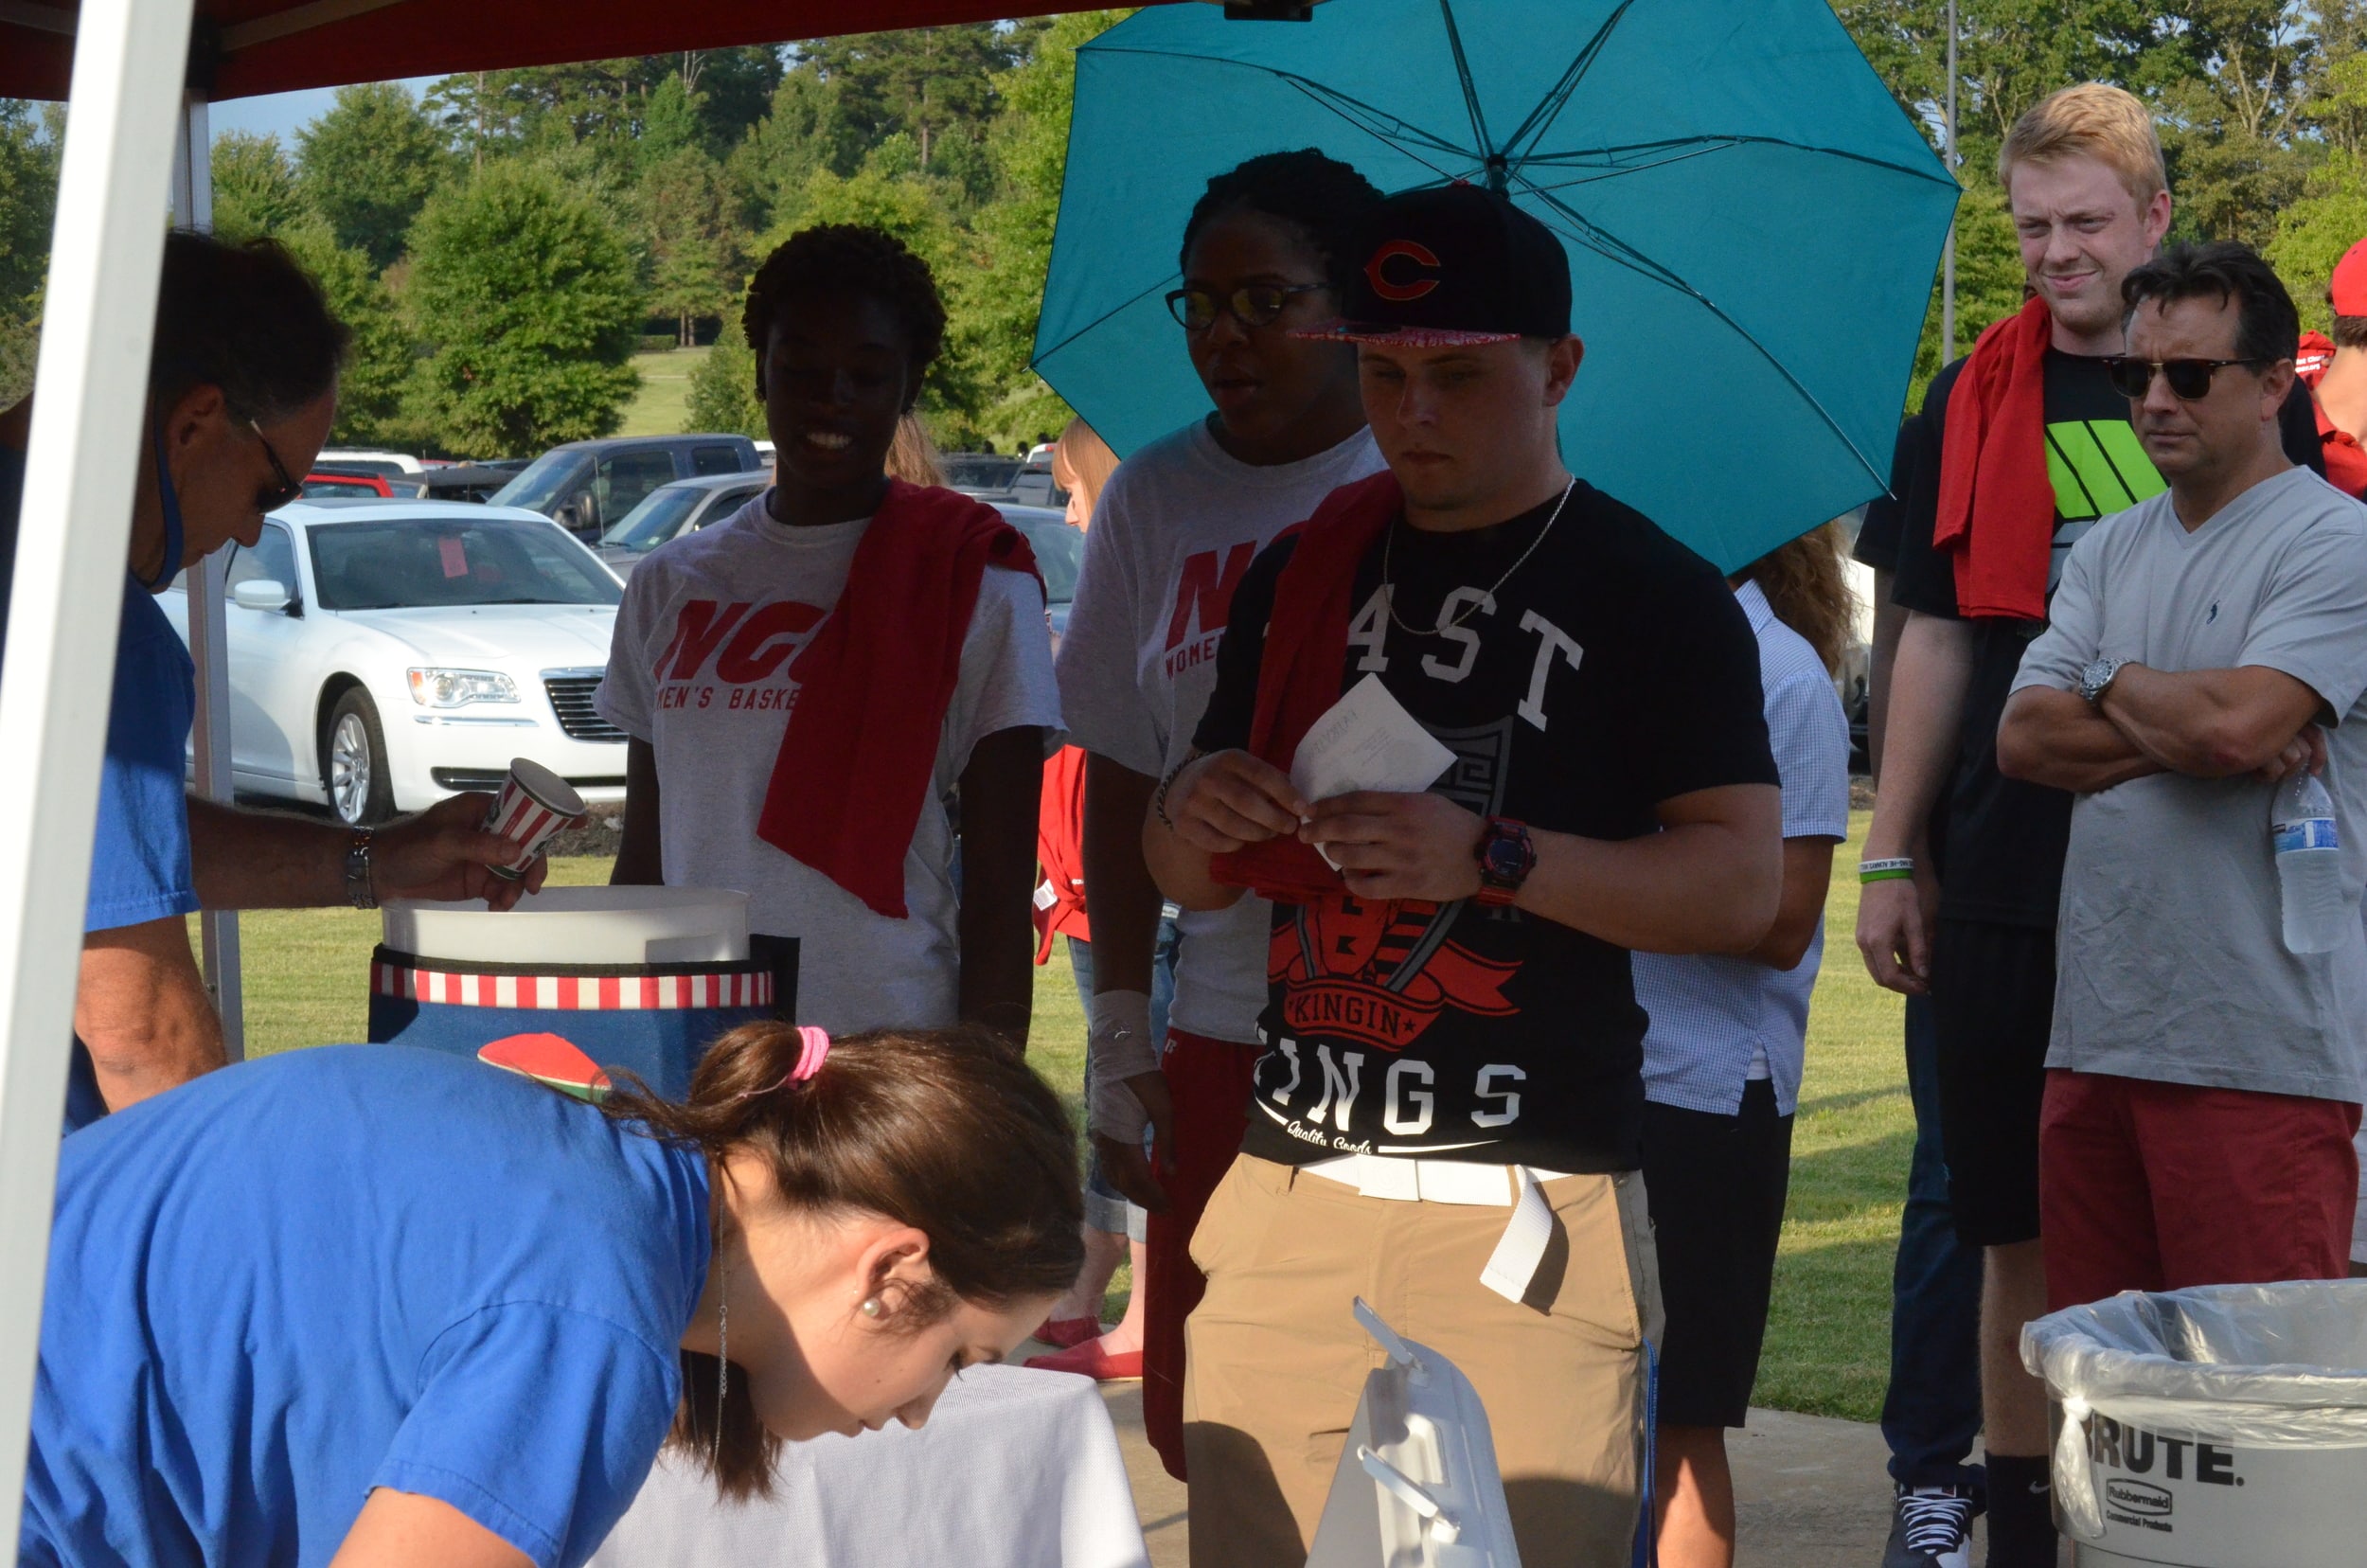  Students are in line to get free frozen treats from the local Italian Ice shop, RIta's. 